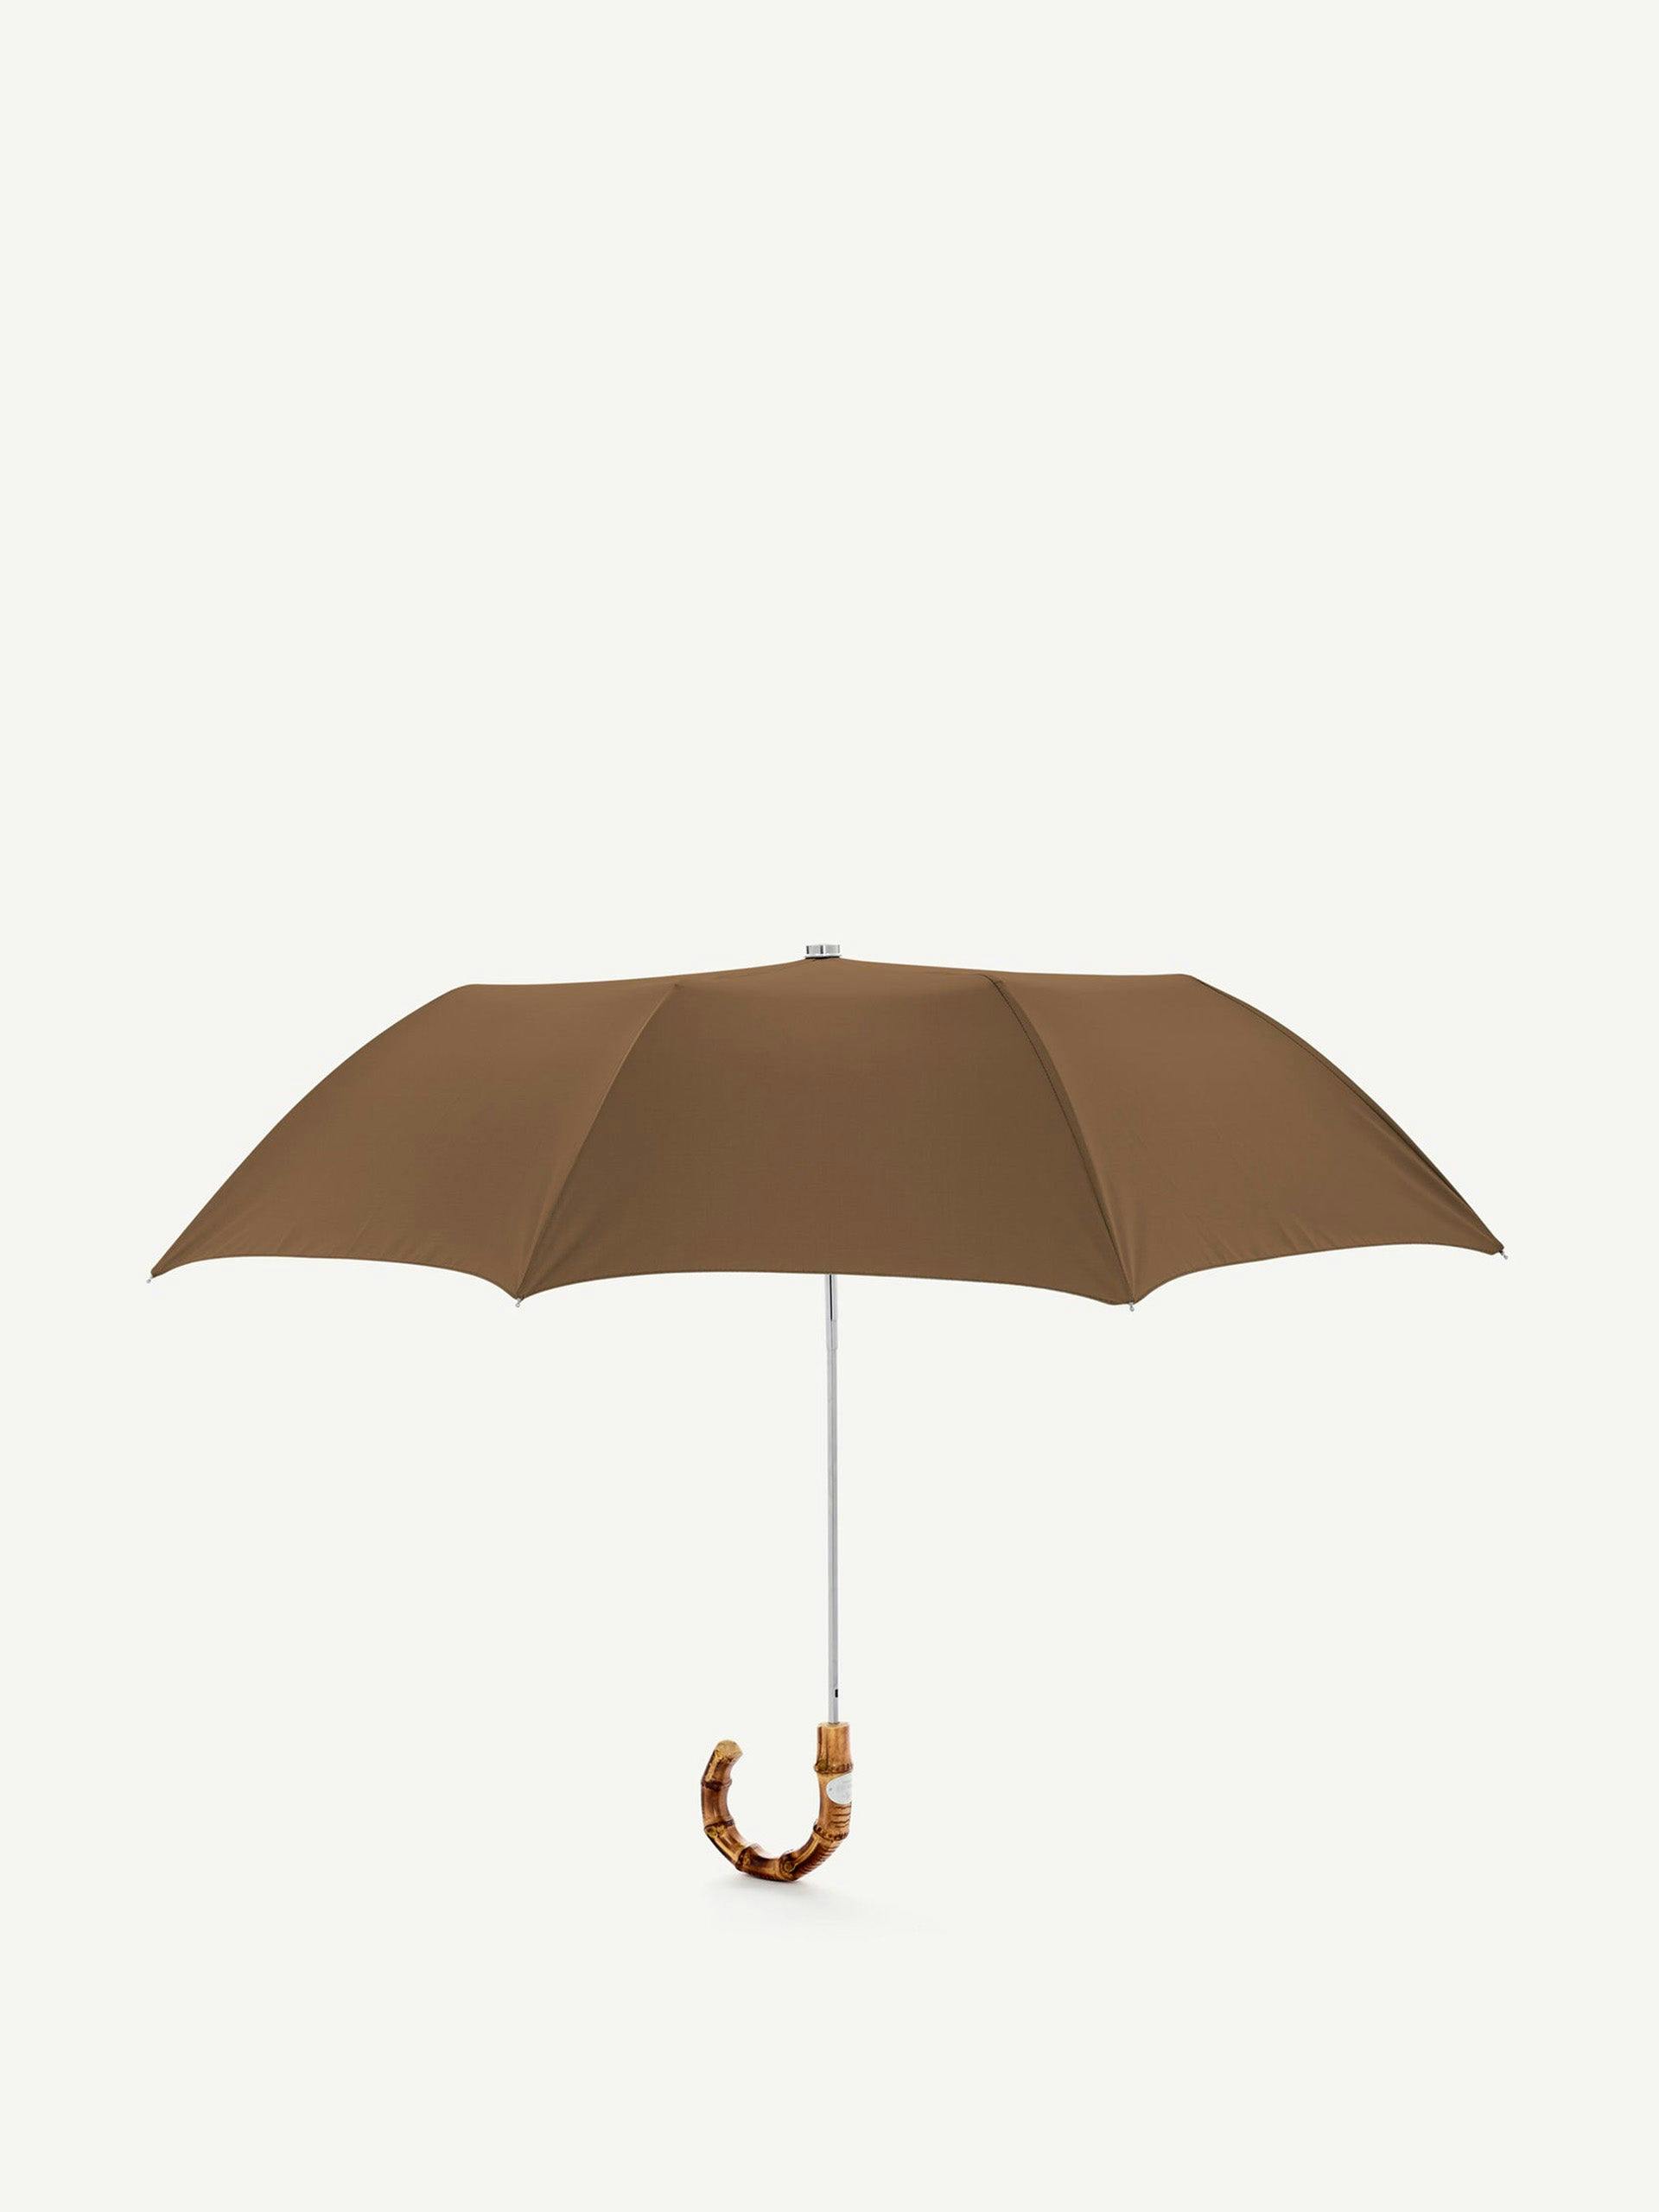 Collapsible umbrella with bamboo handle